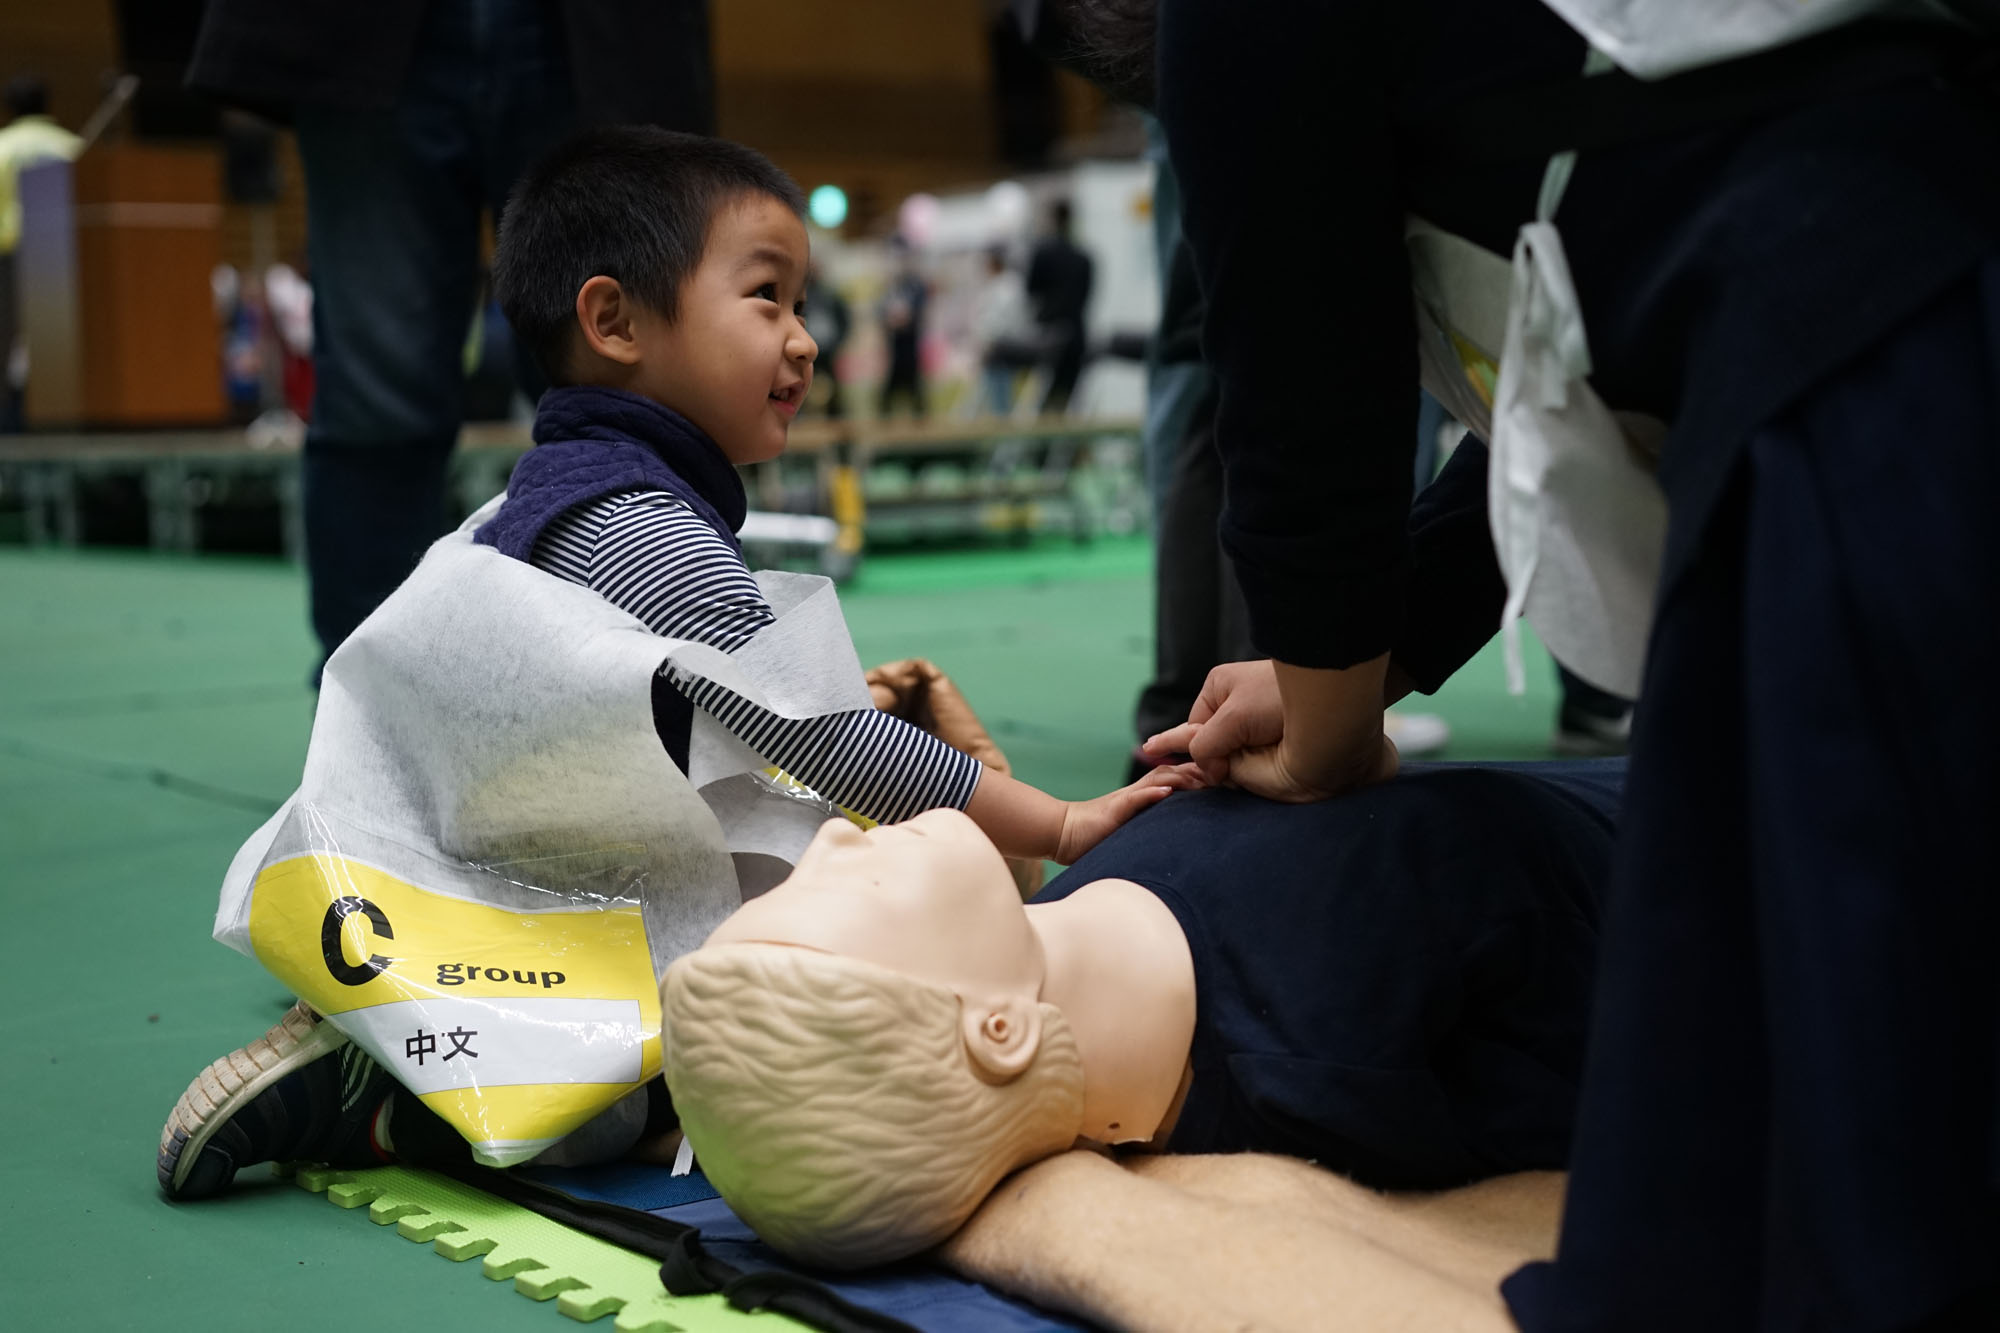 Li Wu Yi Feng, 4, helps his mother 'resuscitate' a practice dummy during a drill for foreign residents held Wednesday in Setagaya Ward, Tokyo. | RYUSEI TAKAHASHI